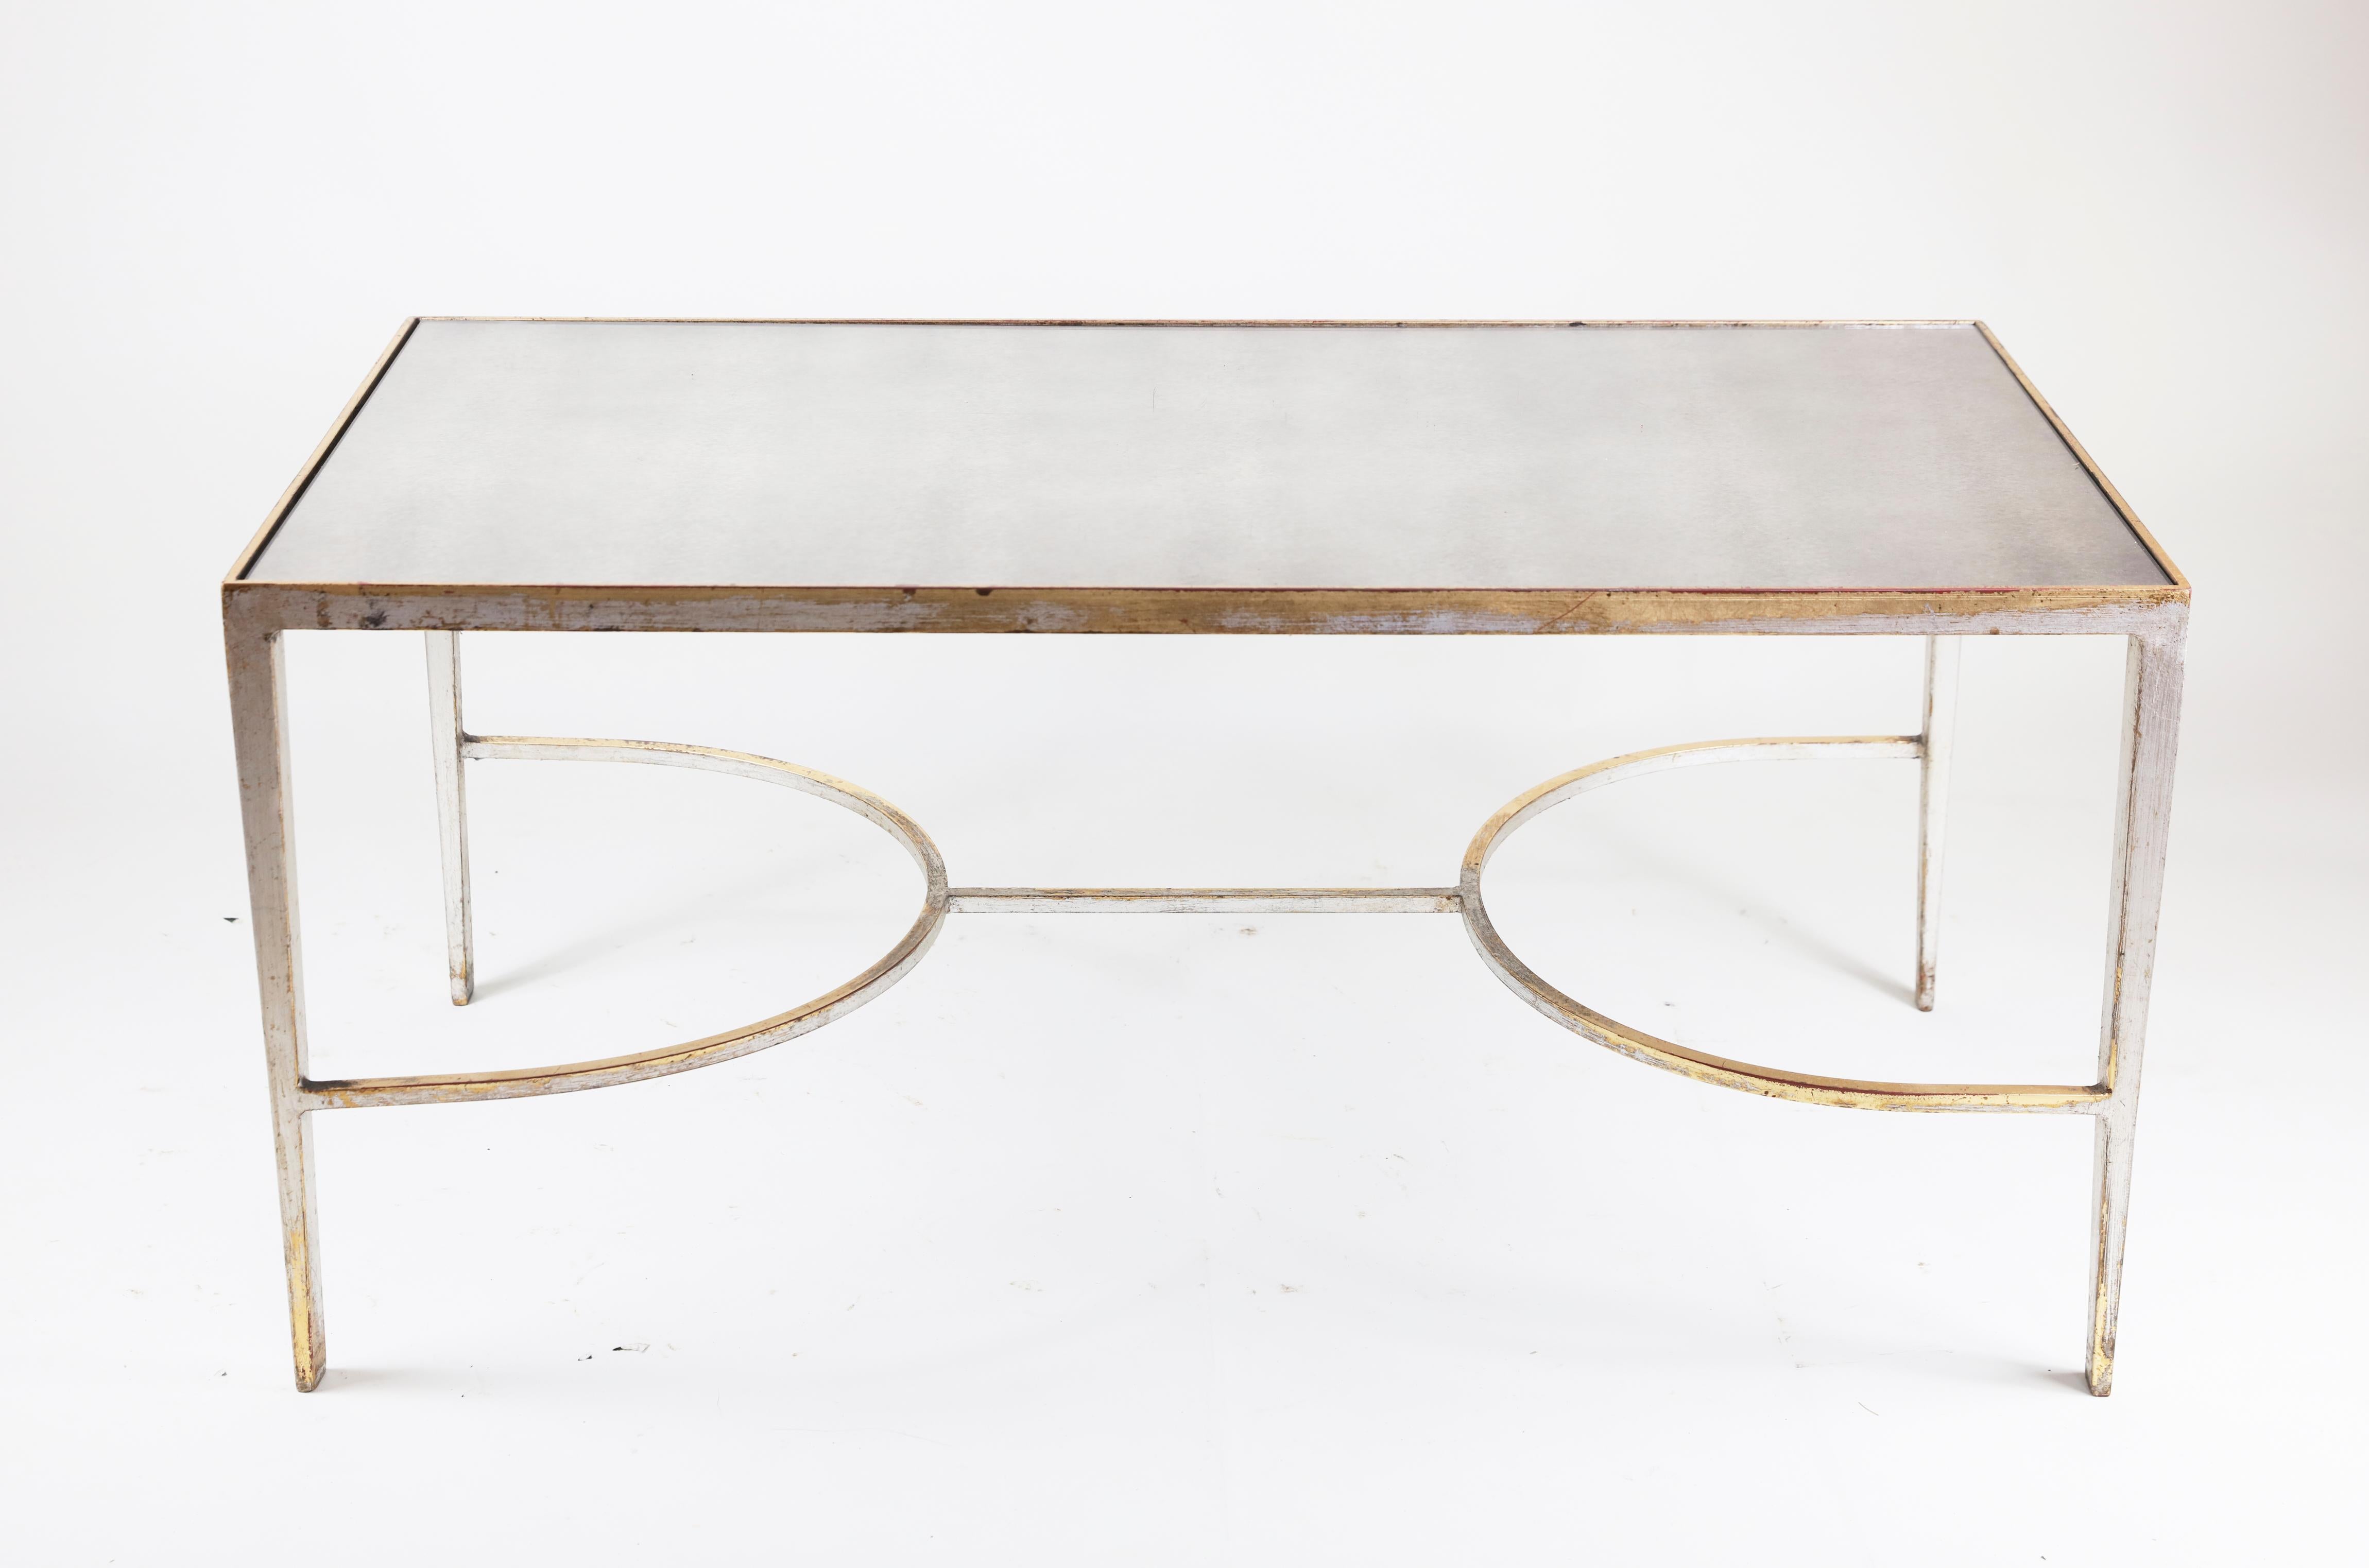 Silver & Gold Mirrored Cocktail Table 3 Pieces
70